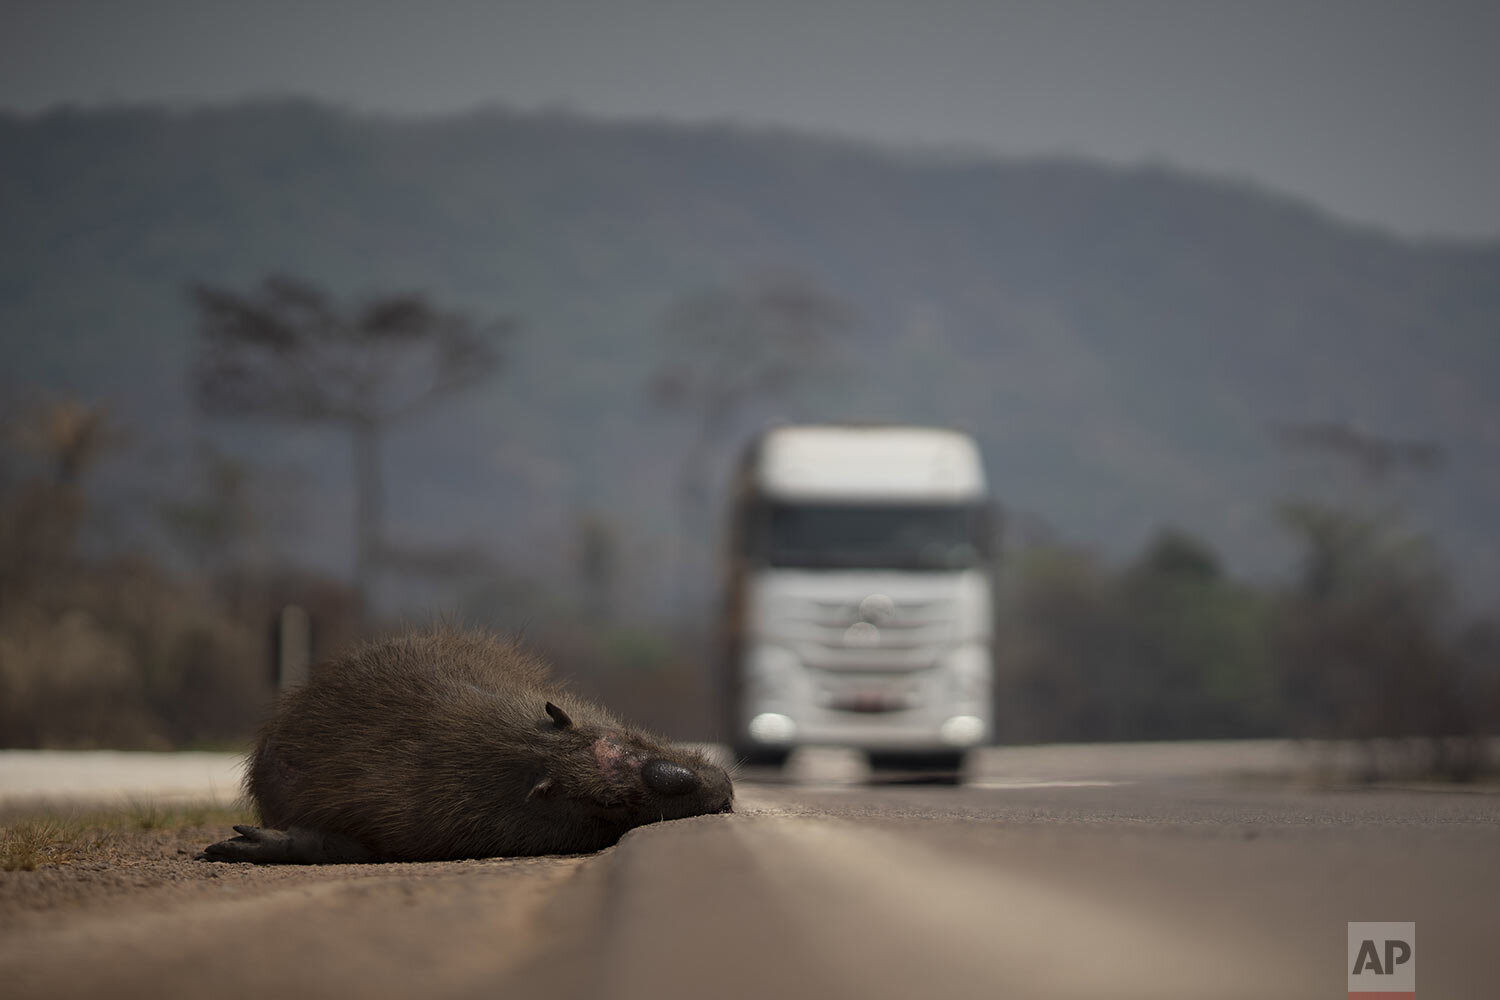  A dead capybara lays on the side of the highway in Altamira, Para state, one of the states affected by the blazes that in the last weeks have been hitting the Amazon region of Brazil, Aug. 24, 2019. (AP Photo/Leo Correa) 